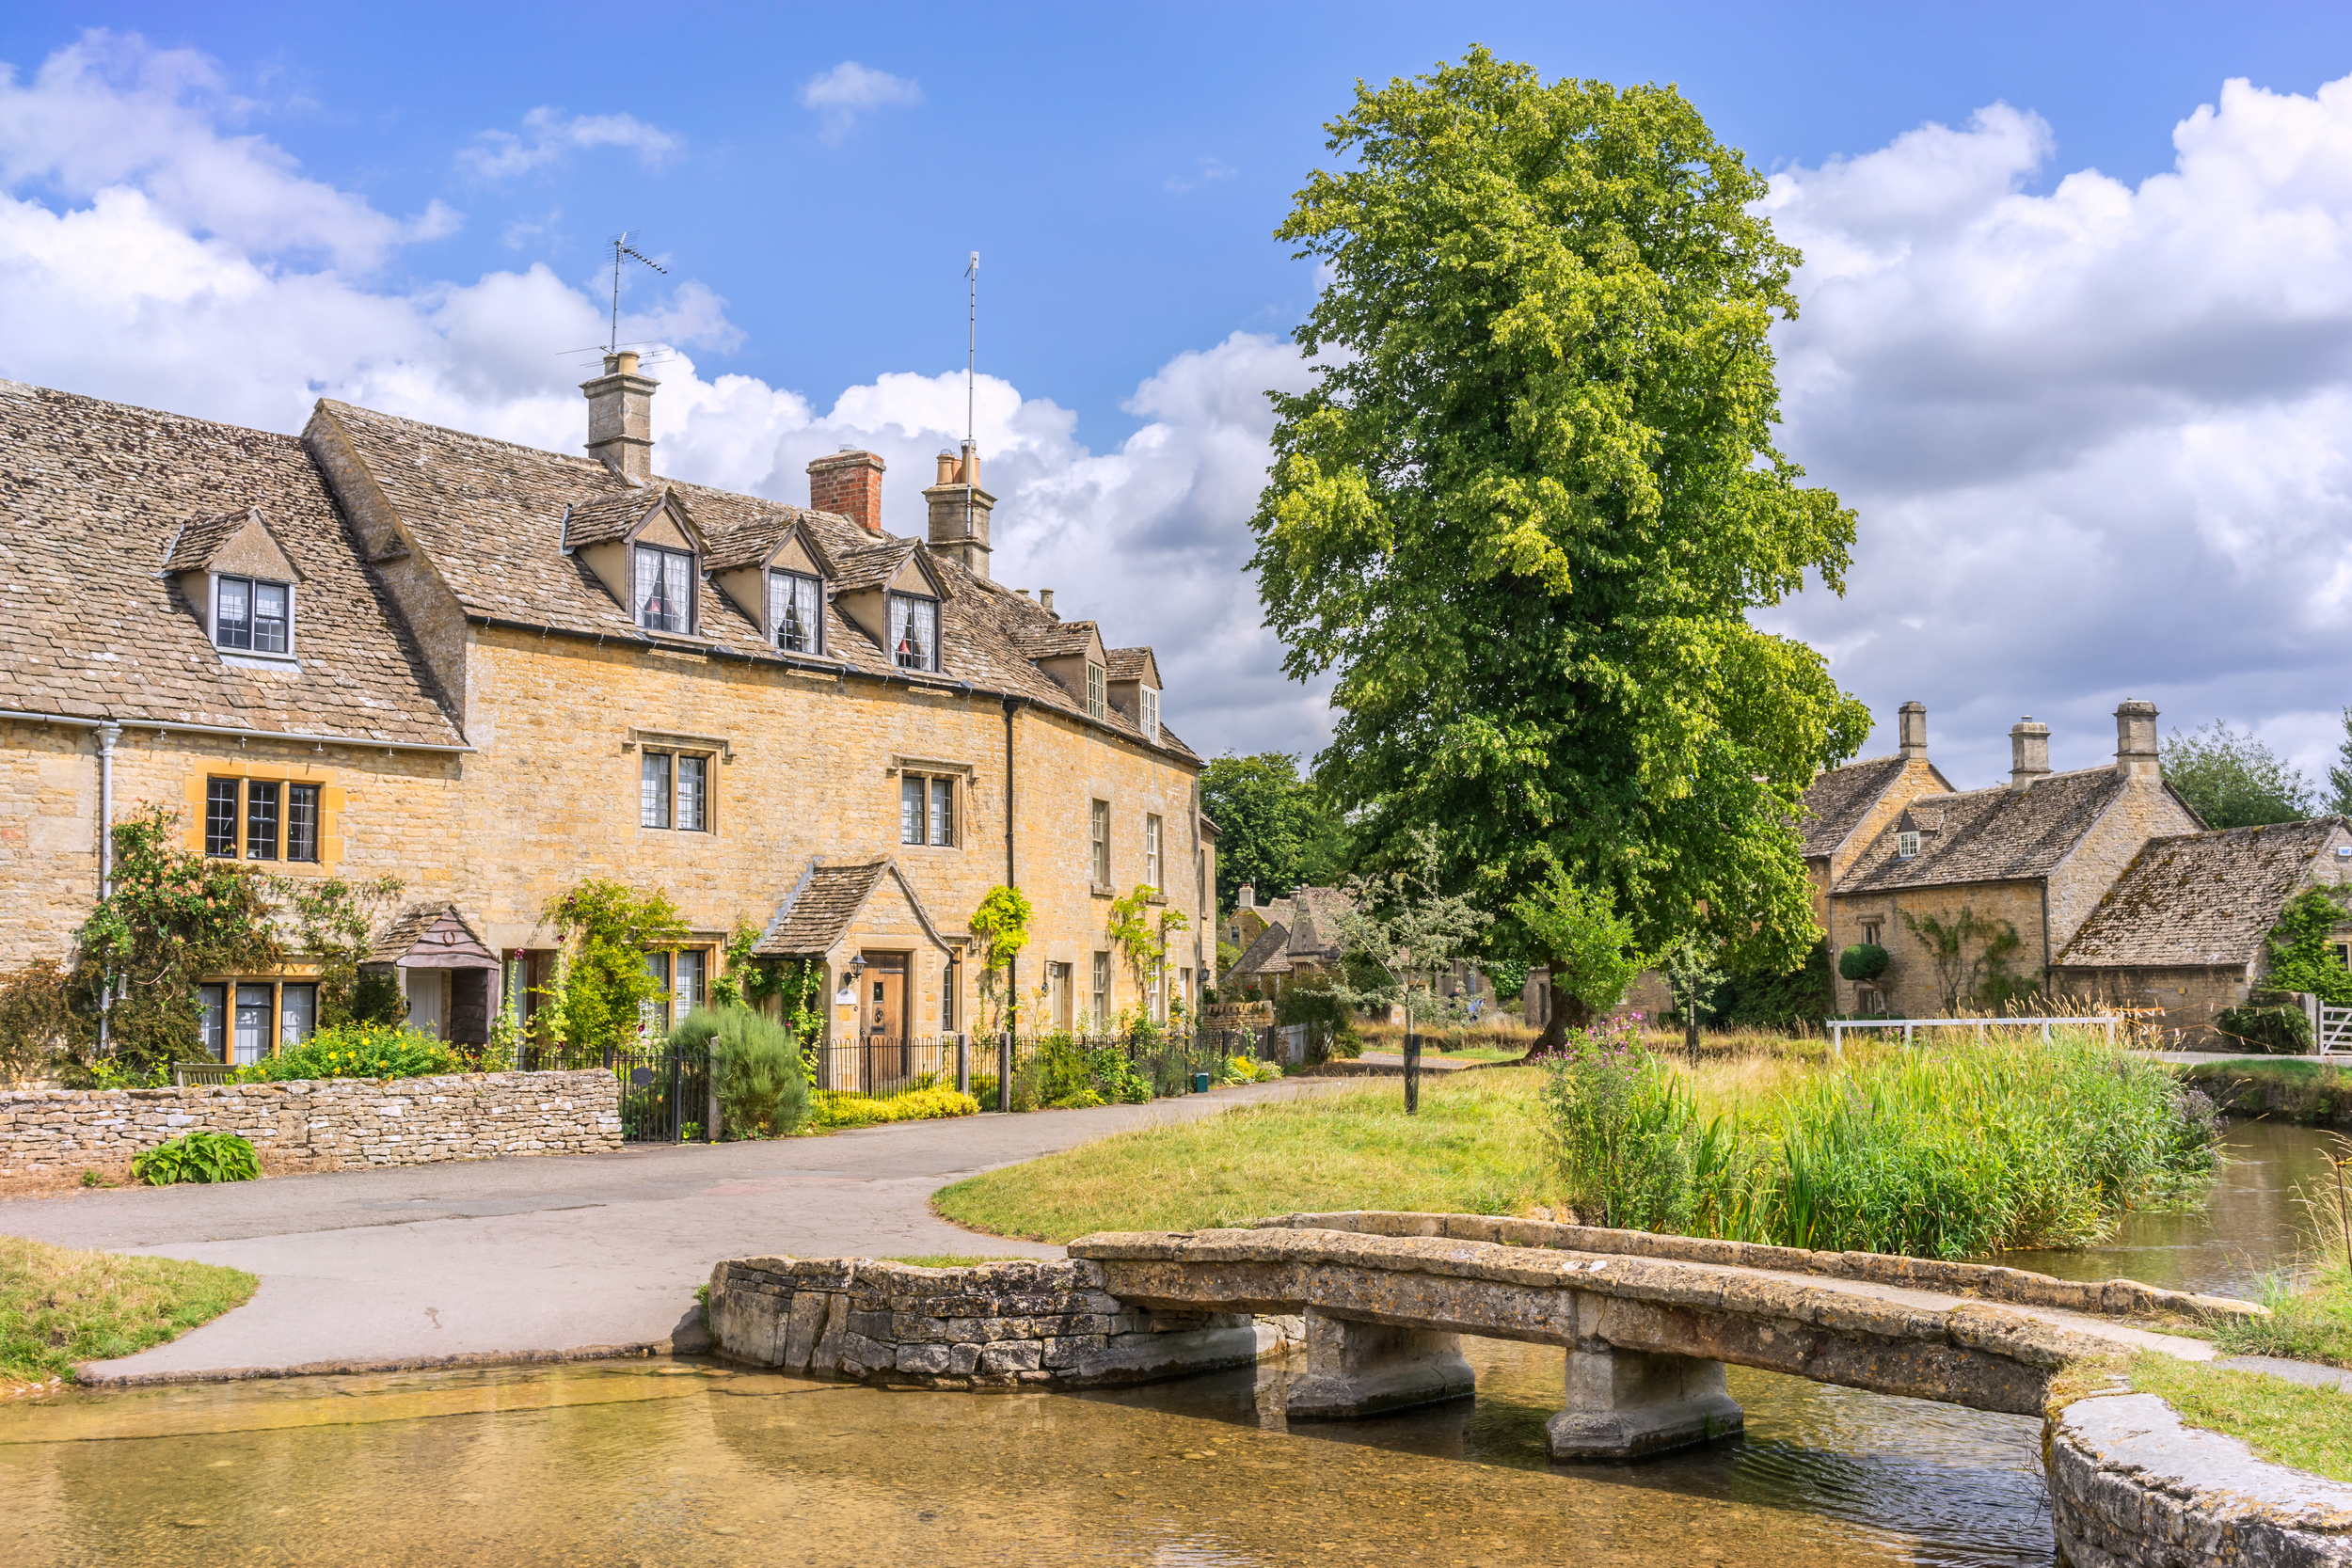 <p>If one region on this list is known for walking, it’s the Cotswolds. Well-trodden walking paths connect the numerous villages in the west of England. You can choose a single base and enjoy walking the English countryside to different adorable towns!</p><p>You may also like: <a href='https://www.yardbarker.com/lifestyle/articles/13_european_cities_with_amazing_cafe_culture_122923/s1__38736384'>13 European cities with amazing cafe culture</a></p>